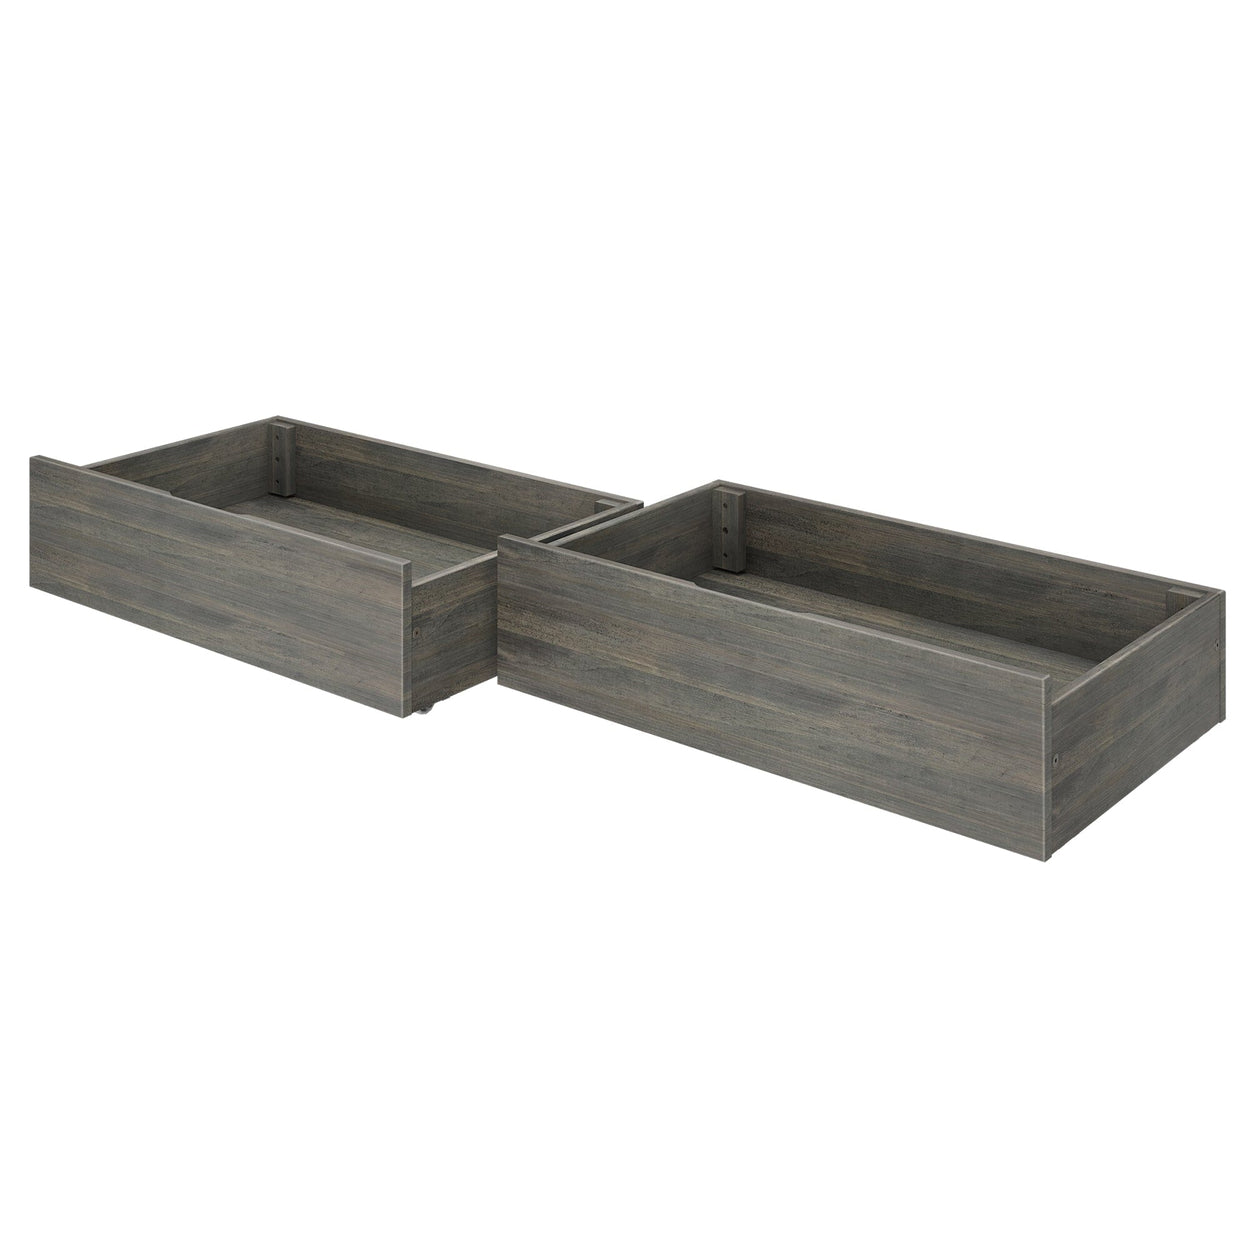 190362-185 : Accessories Farmhouse Full XL & Queen Storage Drawers, Driftwood